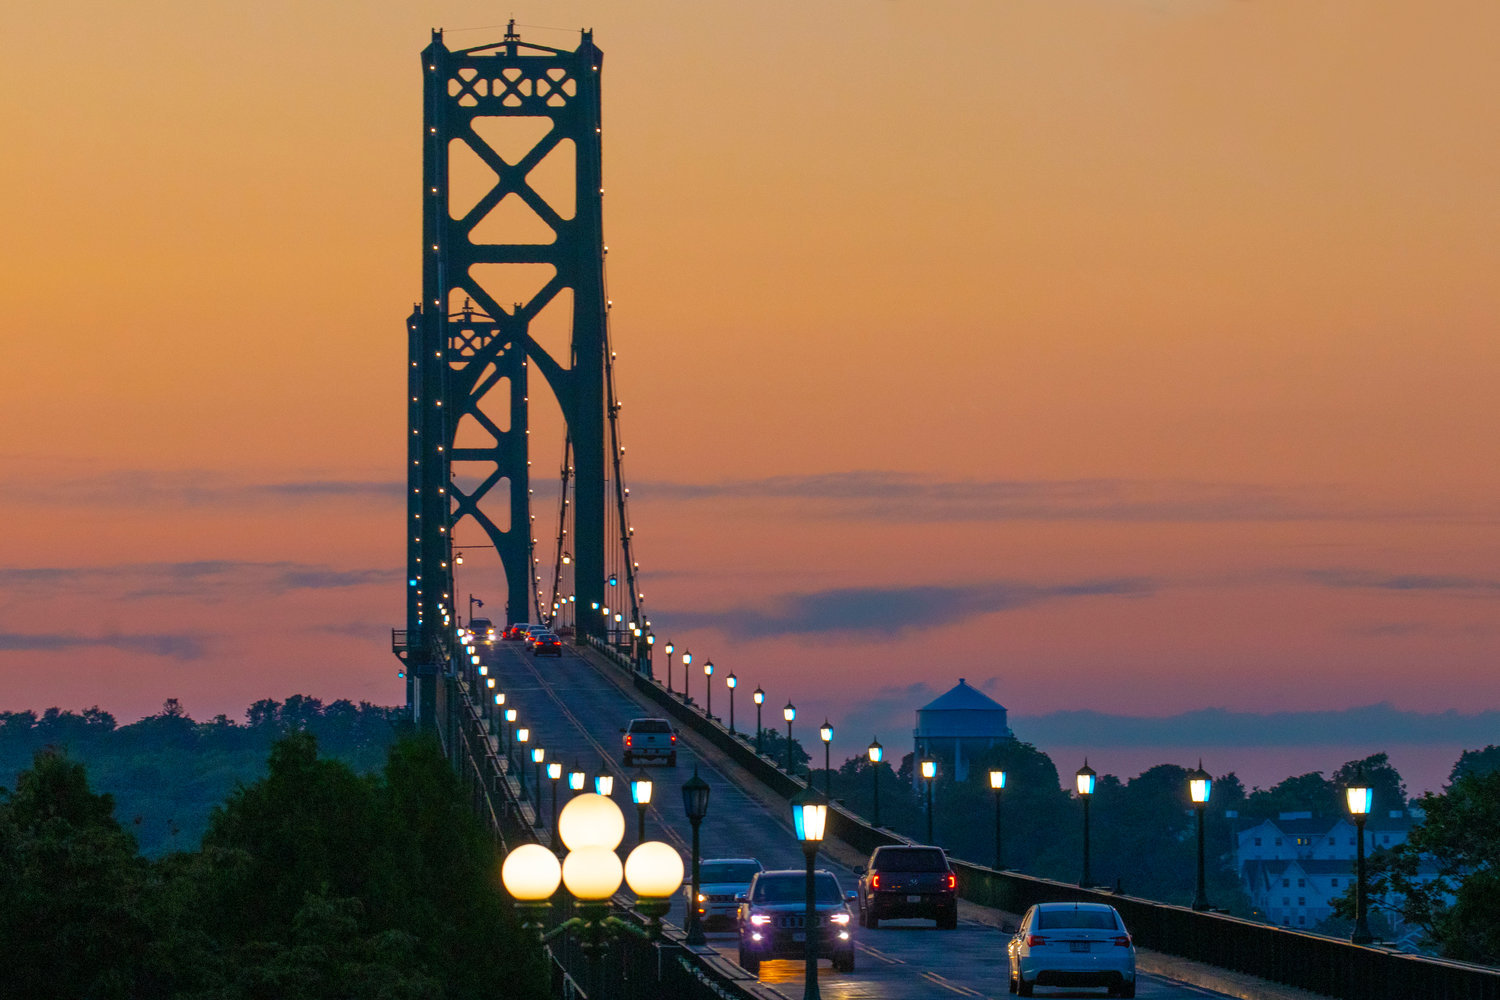 The Mt. Hope Bridge will be subject to a feasibility study for the possible construction of anti-suicide barriers.